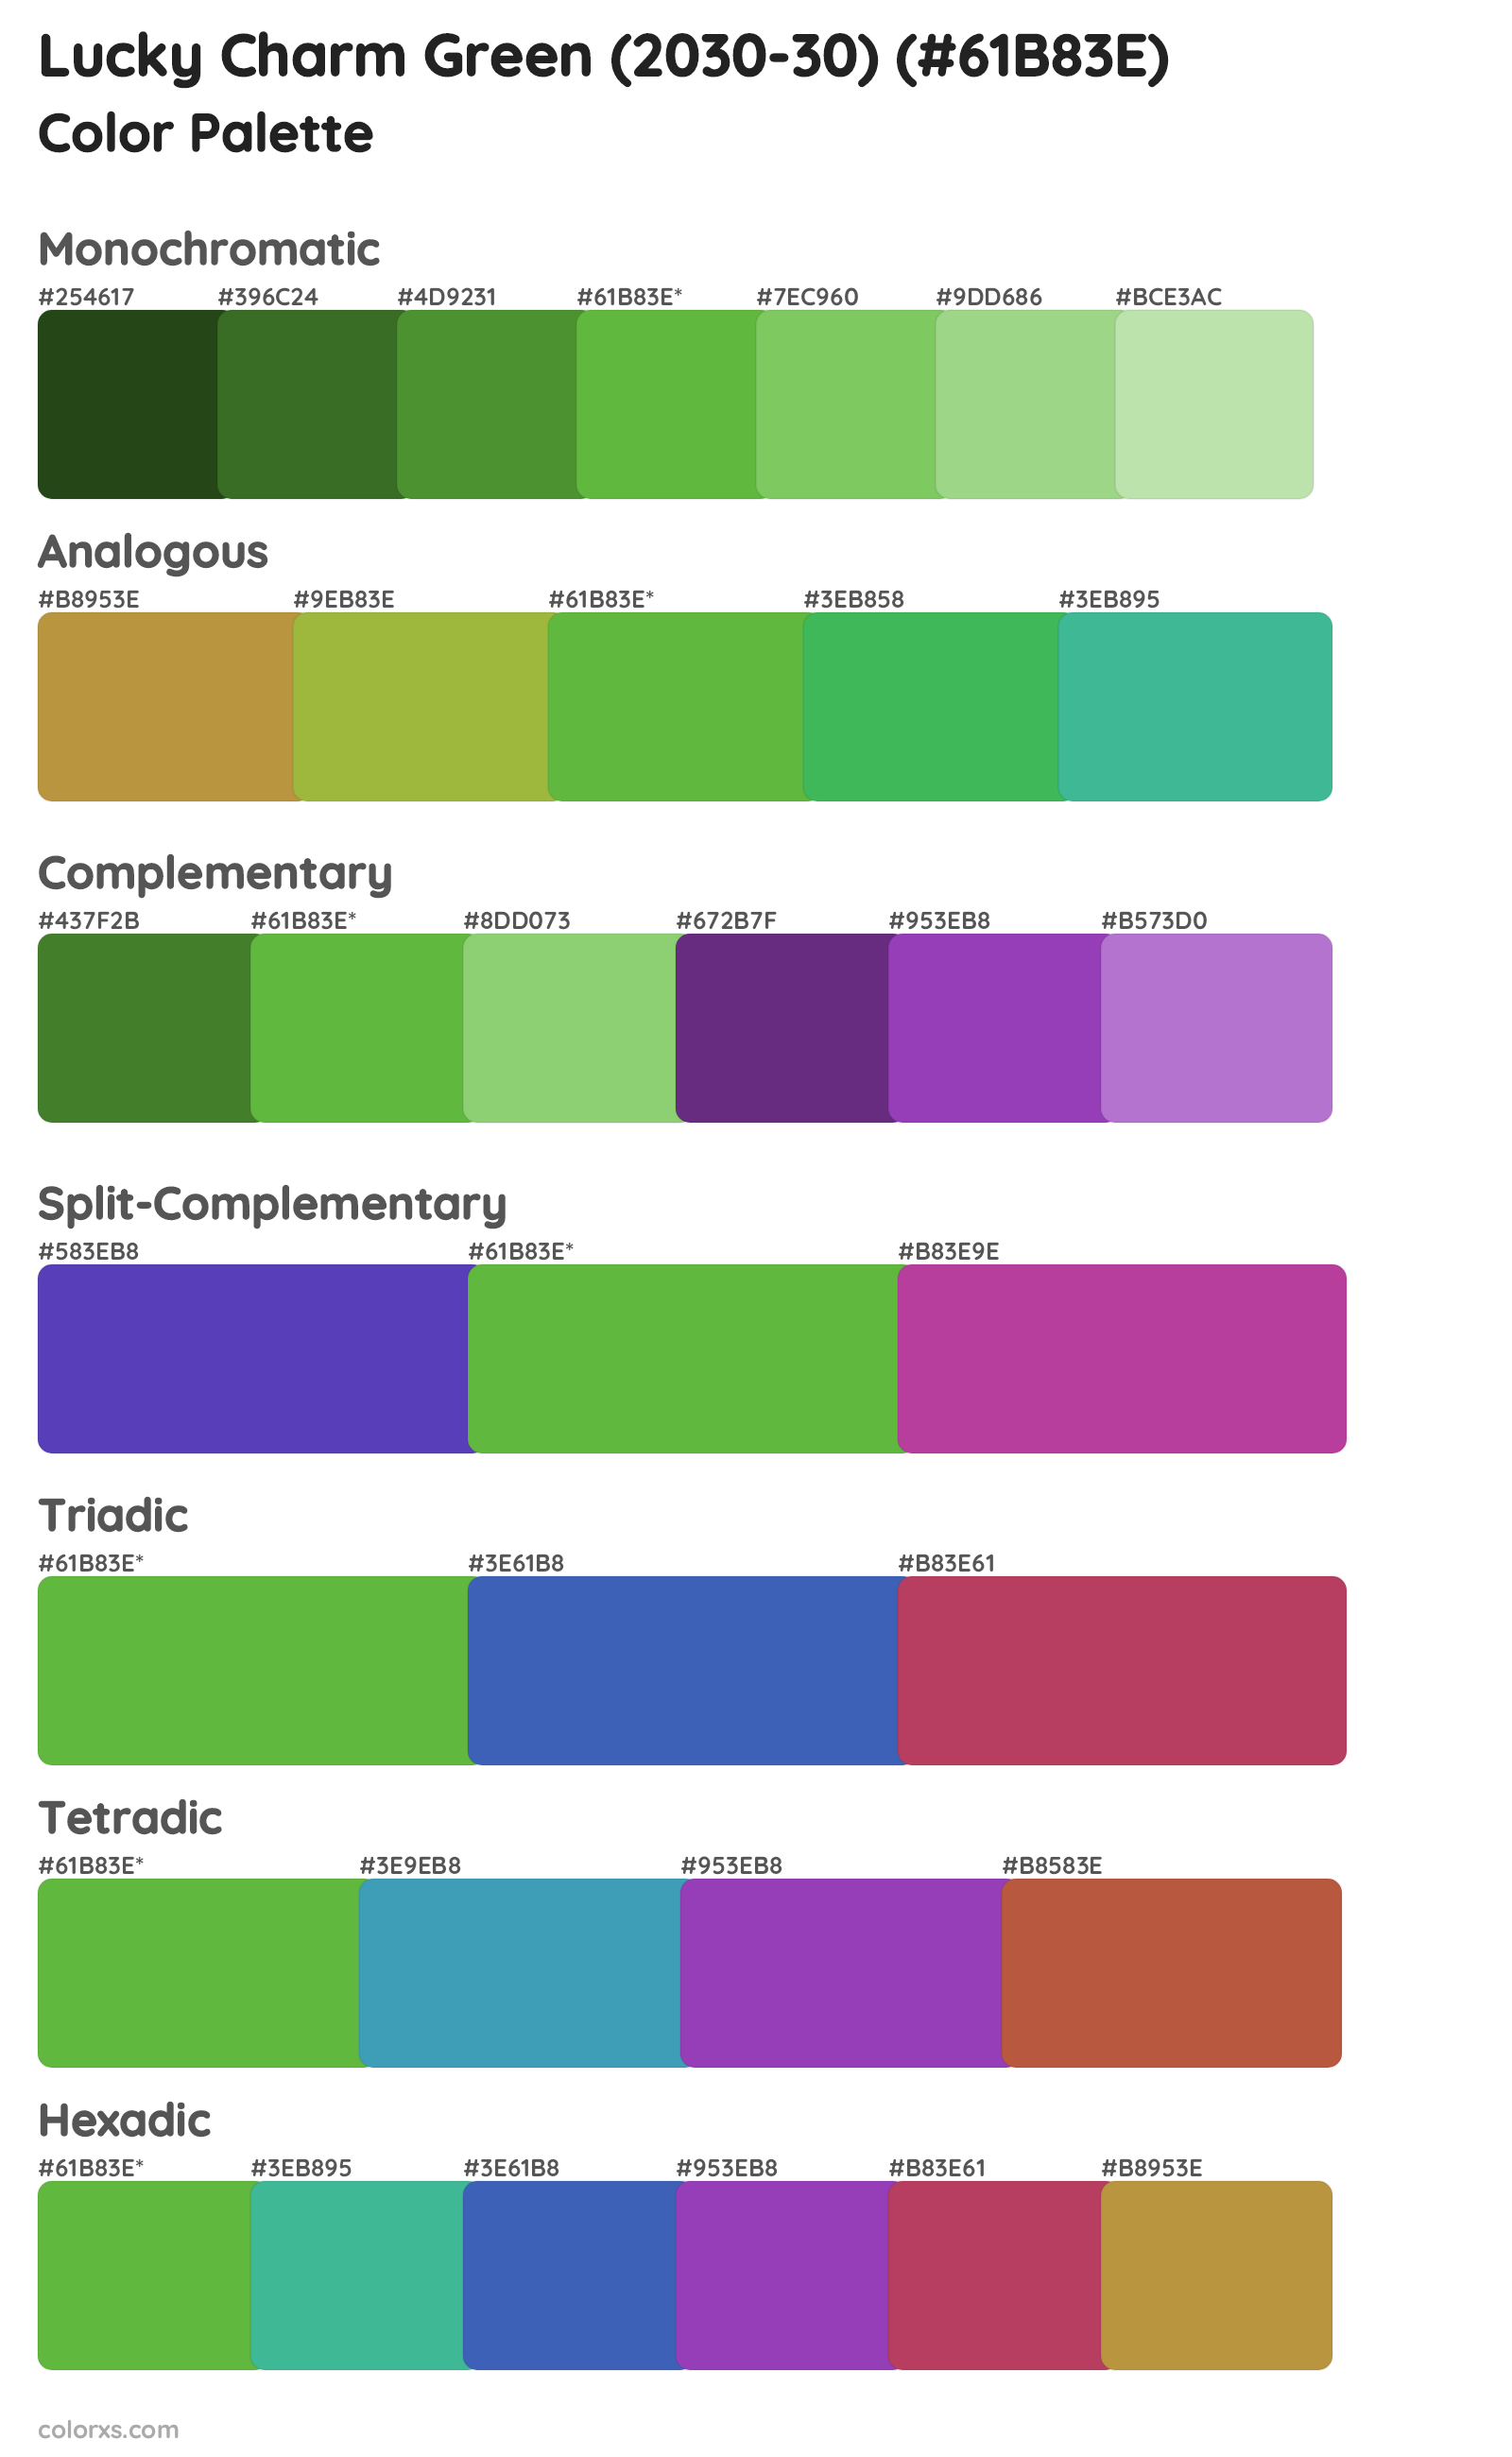 Lucky Charm Green (2030-30) Color Scheme Palettes